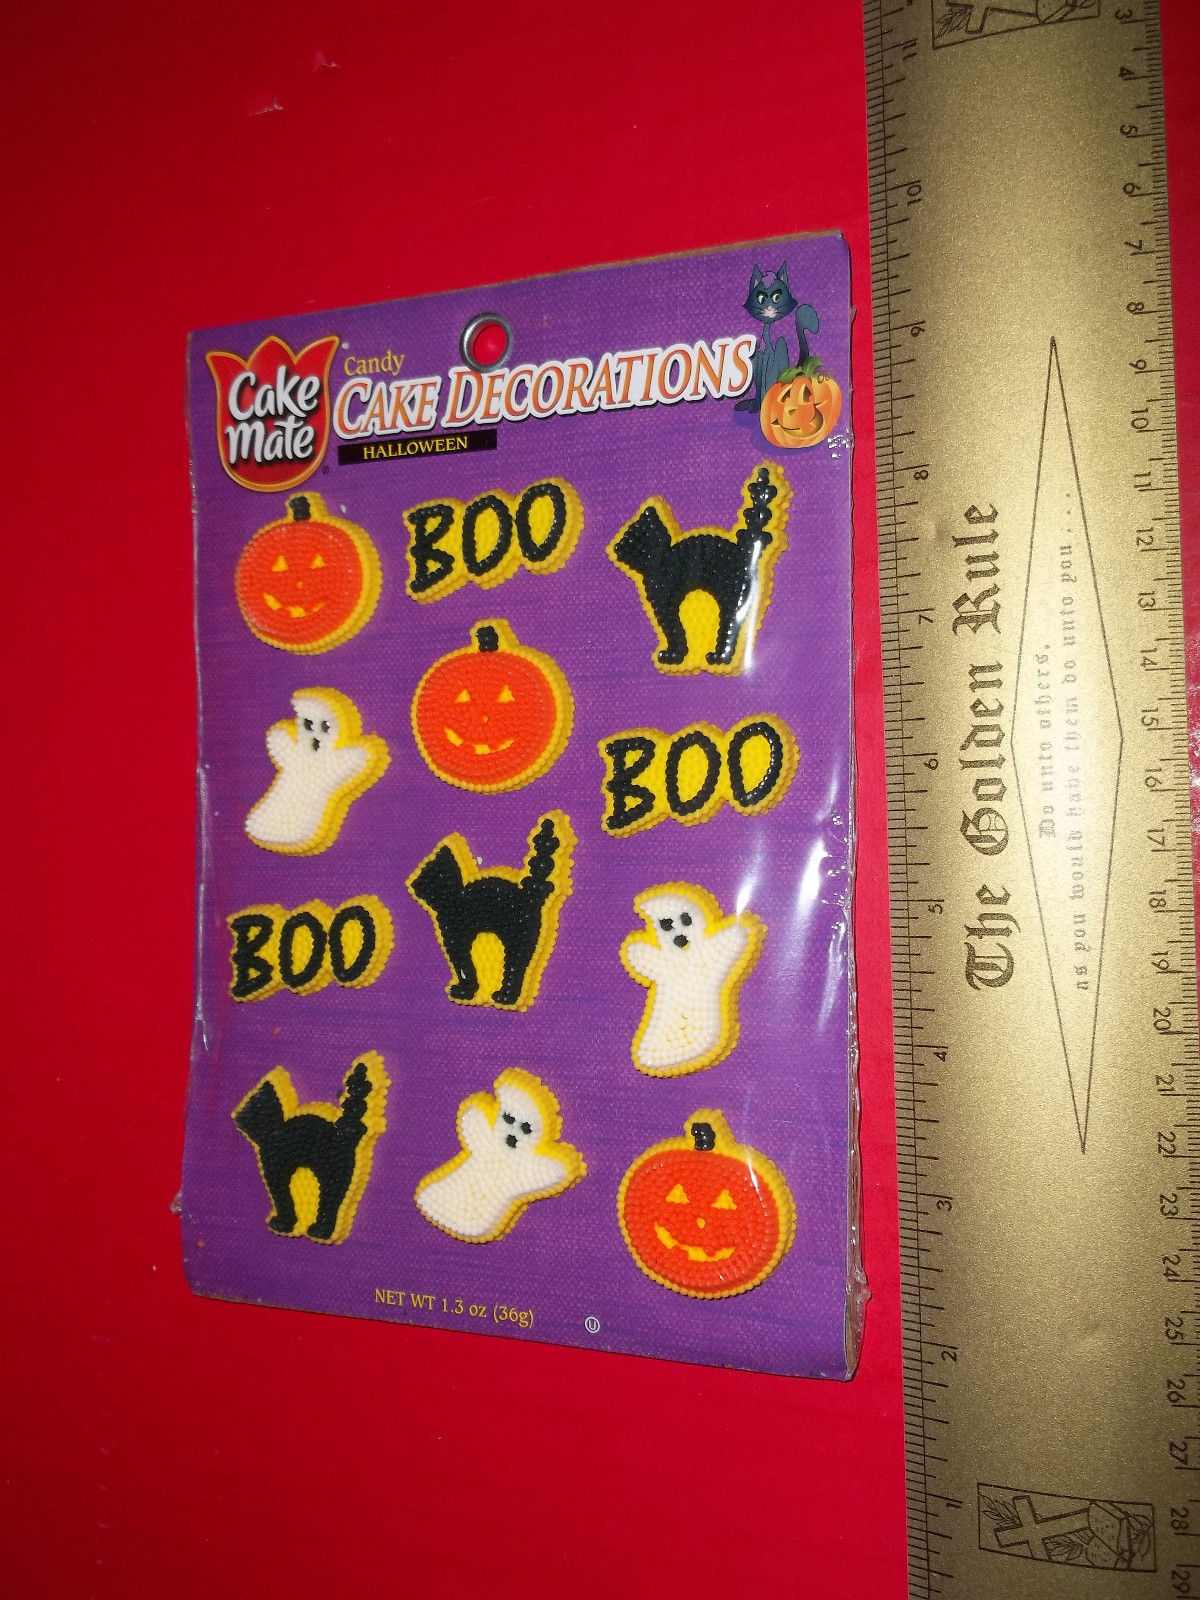 Craft Holiday Food Kit Halloween Candy Cake Decorations Set Boo Party Toppers - $3.79